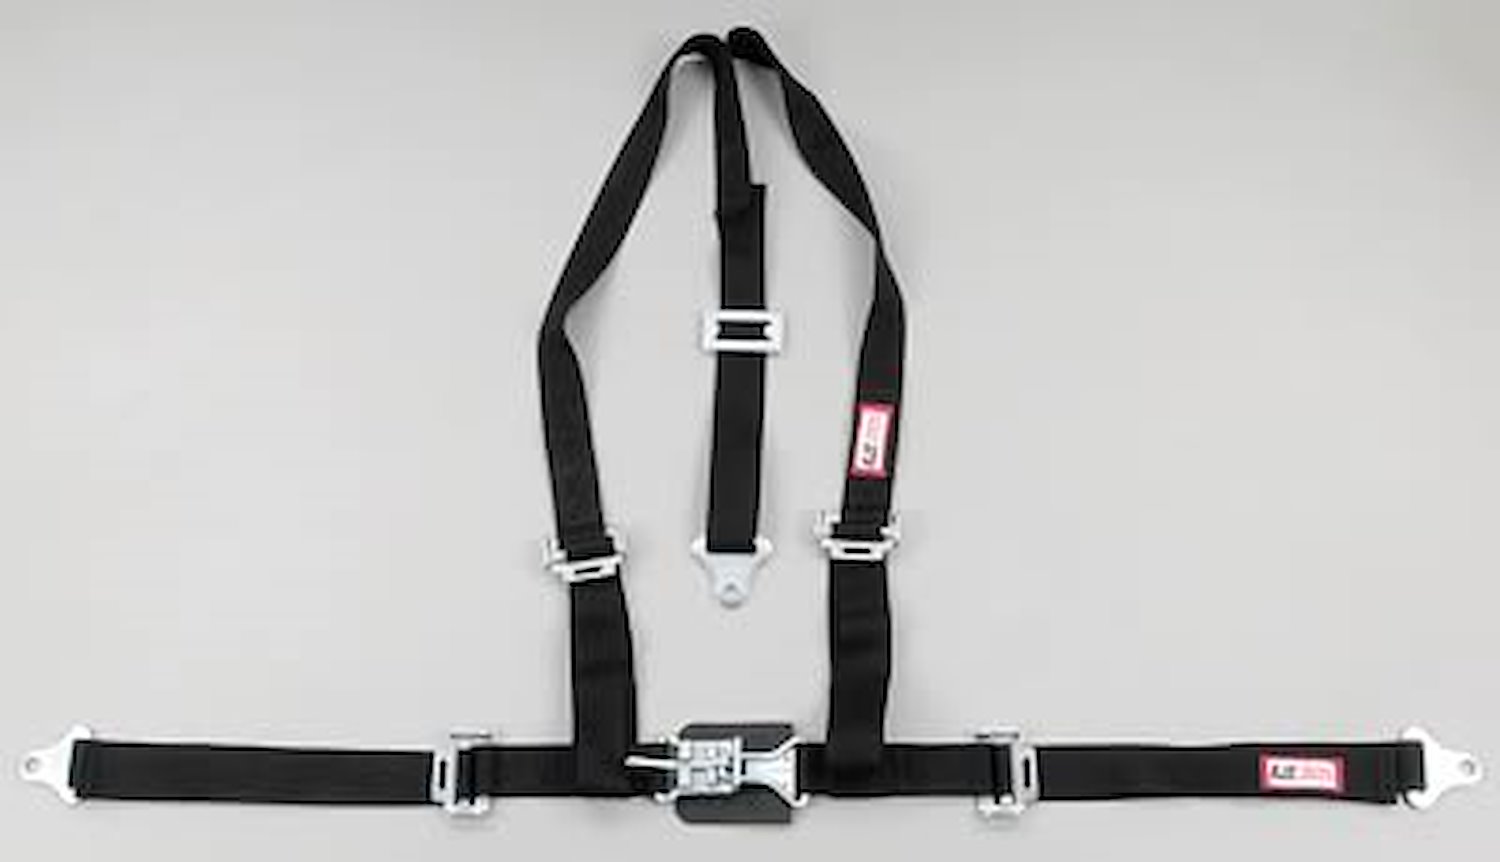 NON-SFI L&L HARNESS 2 PULL DOWN Lap Belt w/Adjuster SNAP 2 S.H. Y FLOOR Mount WRAP/BOLT RED